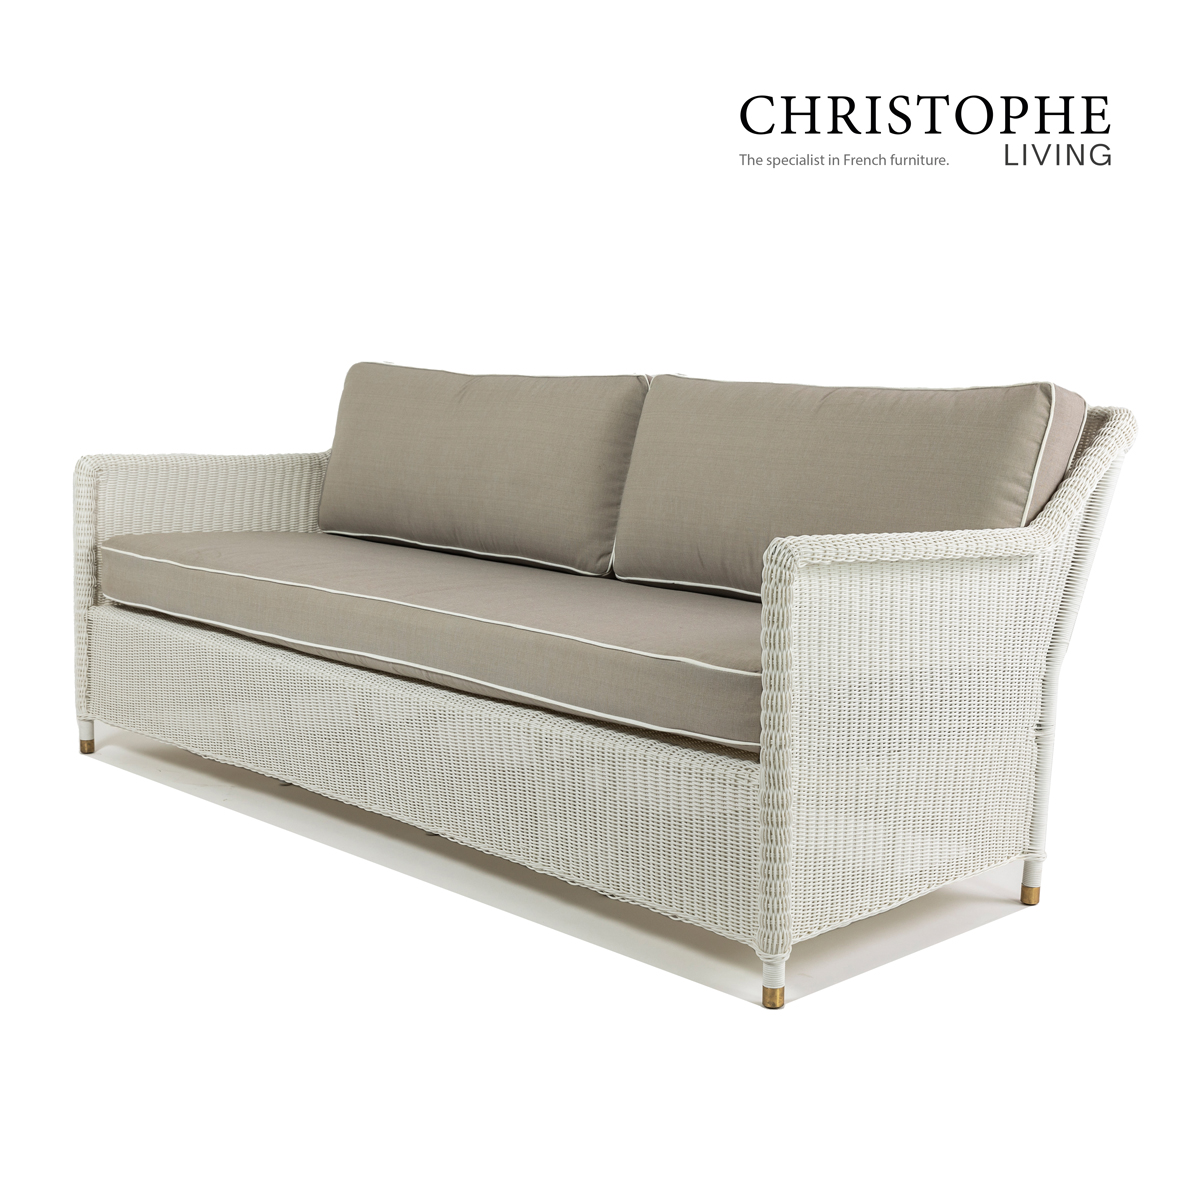 Hyams French Provincial Outdoor 3 Seater Wicker Sofa in Elegant White